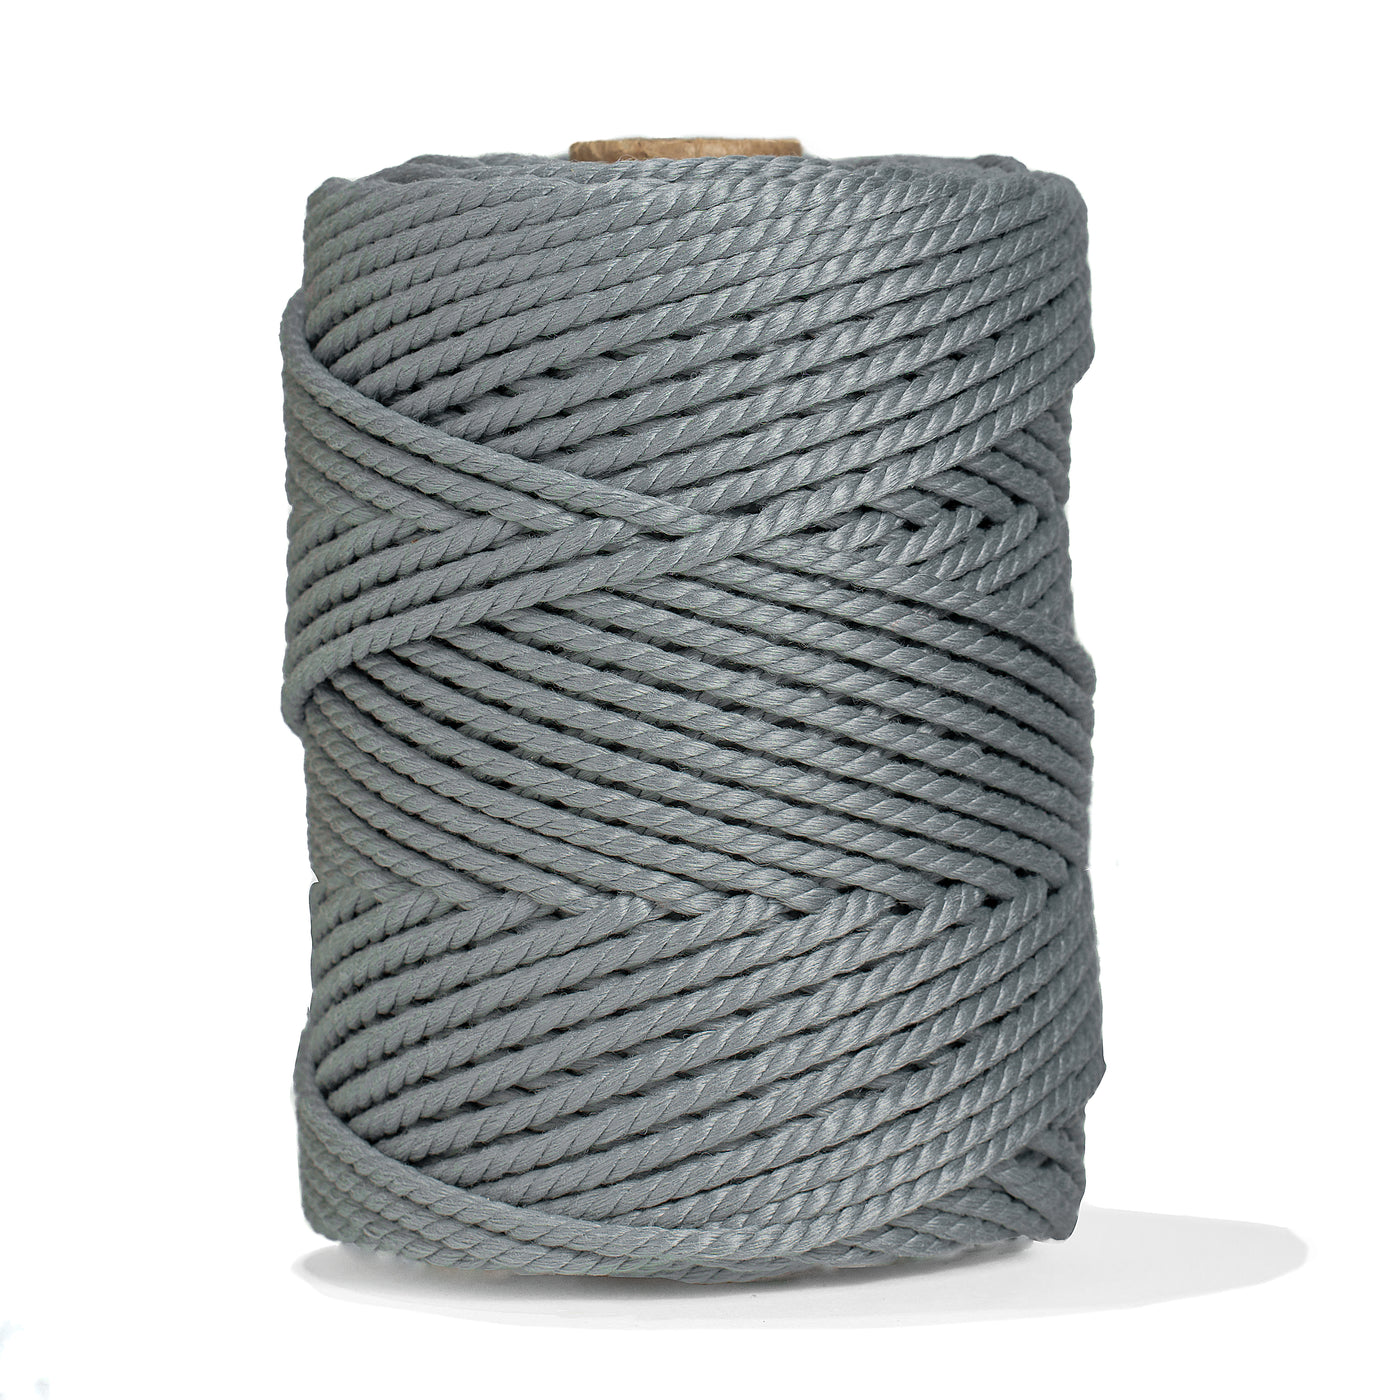 OUTDOOR RECYCLED CORD 3 MM - 3 PLY -  SOFT GRAY COLOR